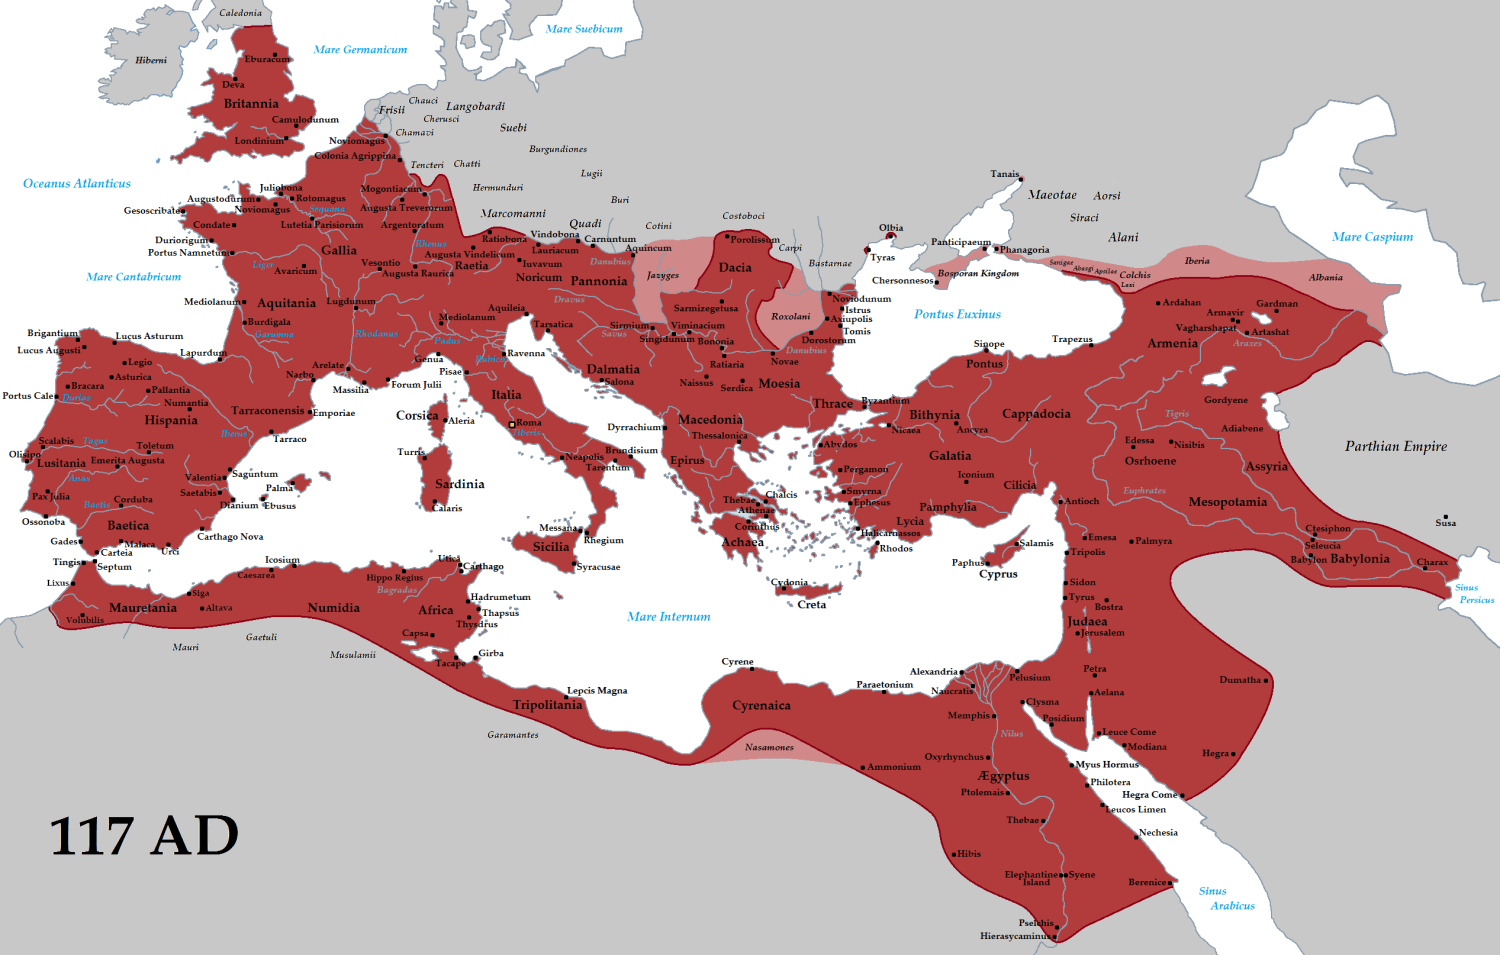 The Largest Extent of the Roman Empire